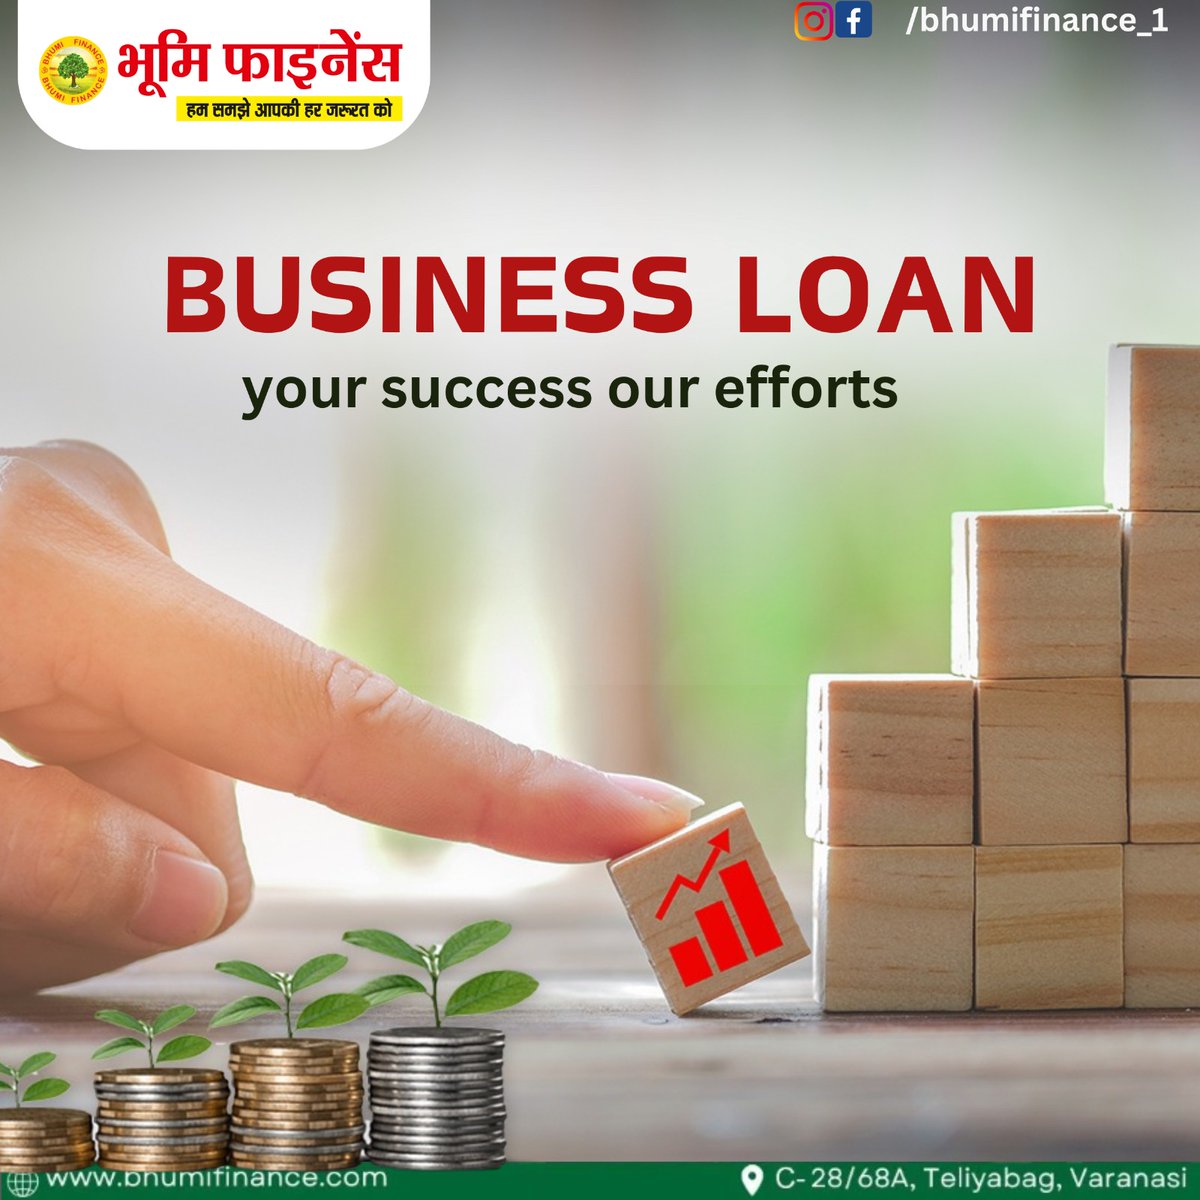 Empower your business ambitions with our tailored business loans

संपर्क करने के लिए इस लिंक पर क्लिक करें :

lnkd.in/dCVHgjV6
bhumifinance.com

#business #businessfinance #businessfinancing #finance #Financing #funding #loan #businessloan #growyourbusiness